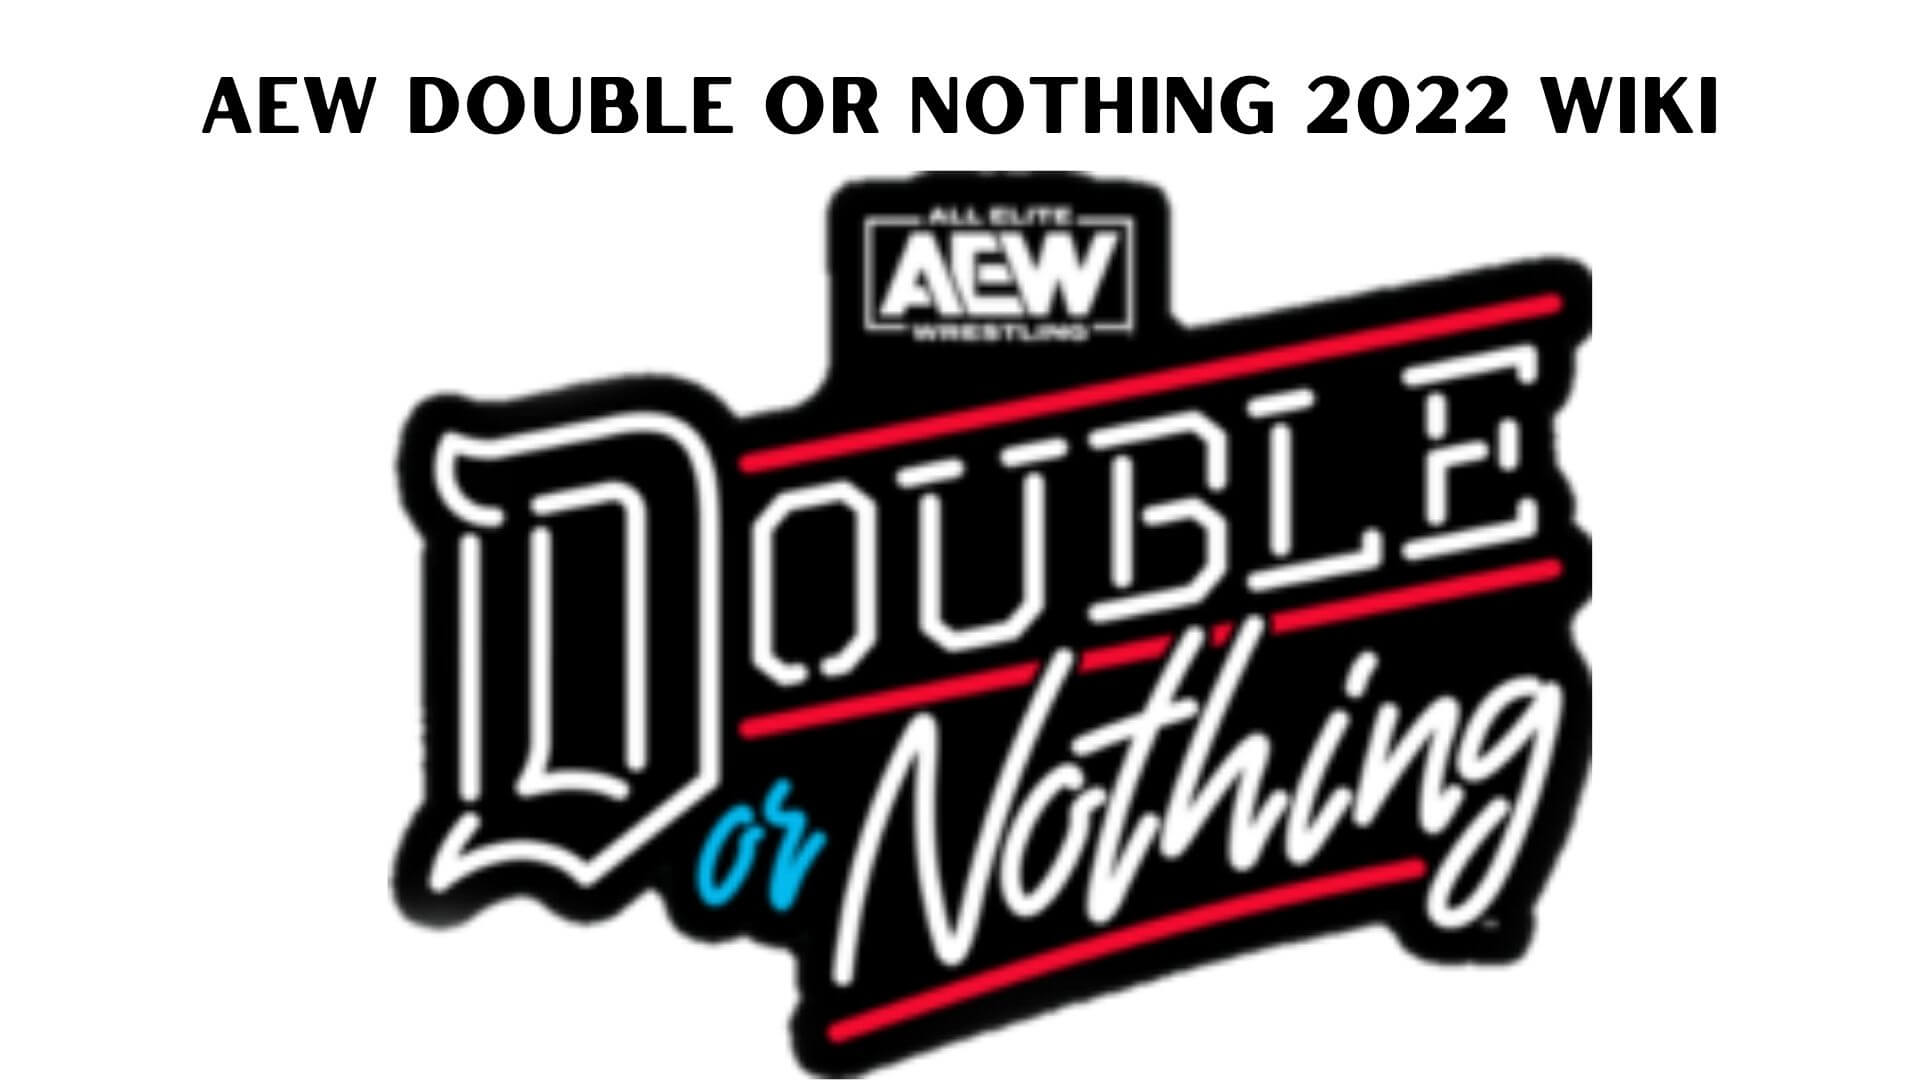 Aew Double or Nothing 2022 Wiki (May 2022) Read Essential Details!